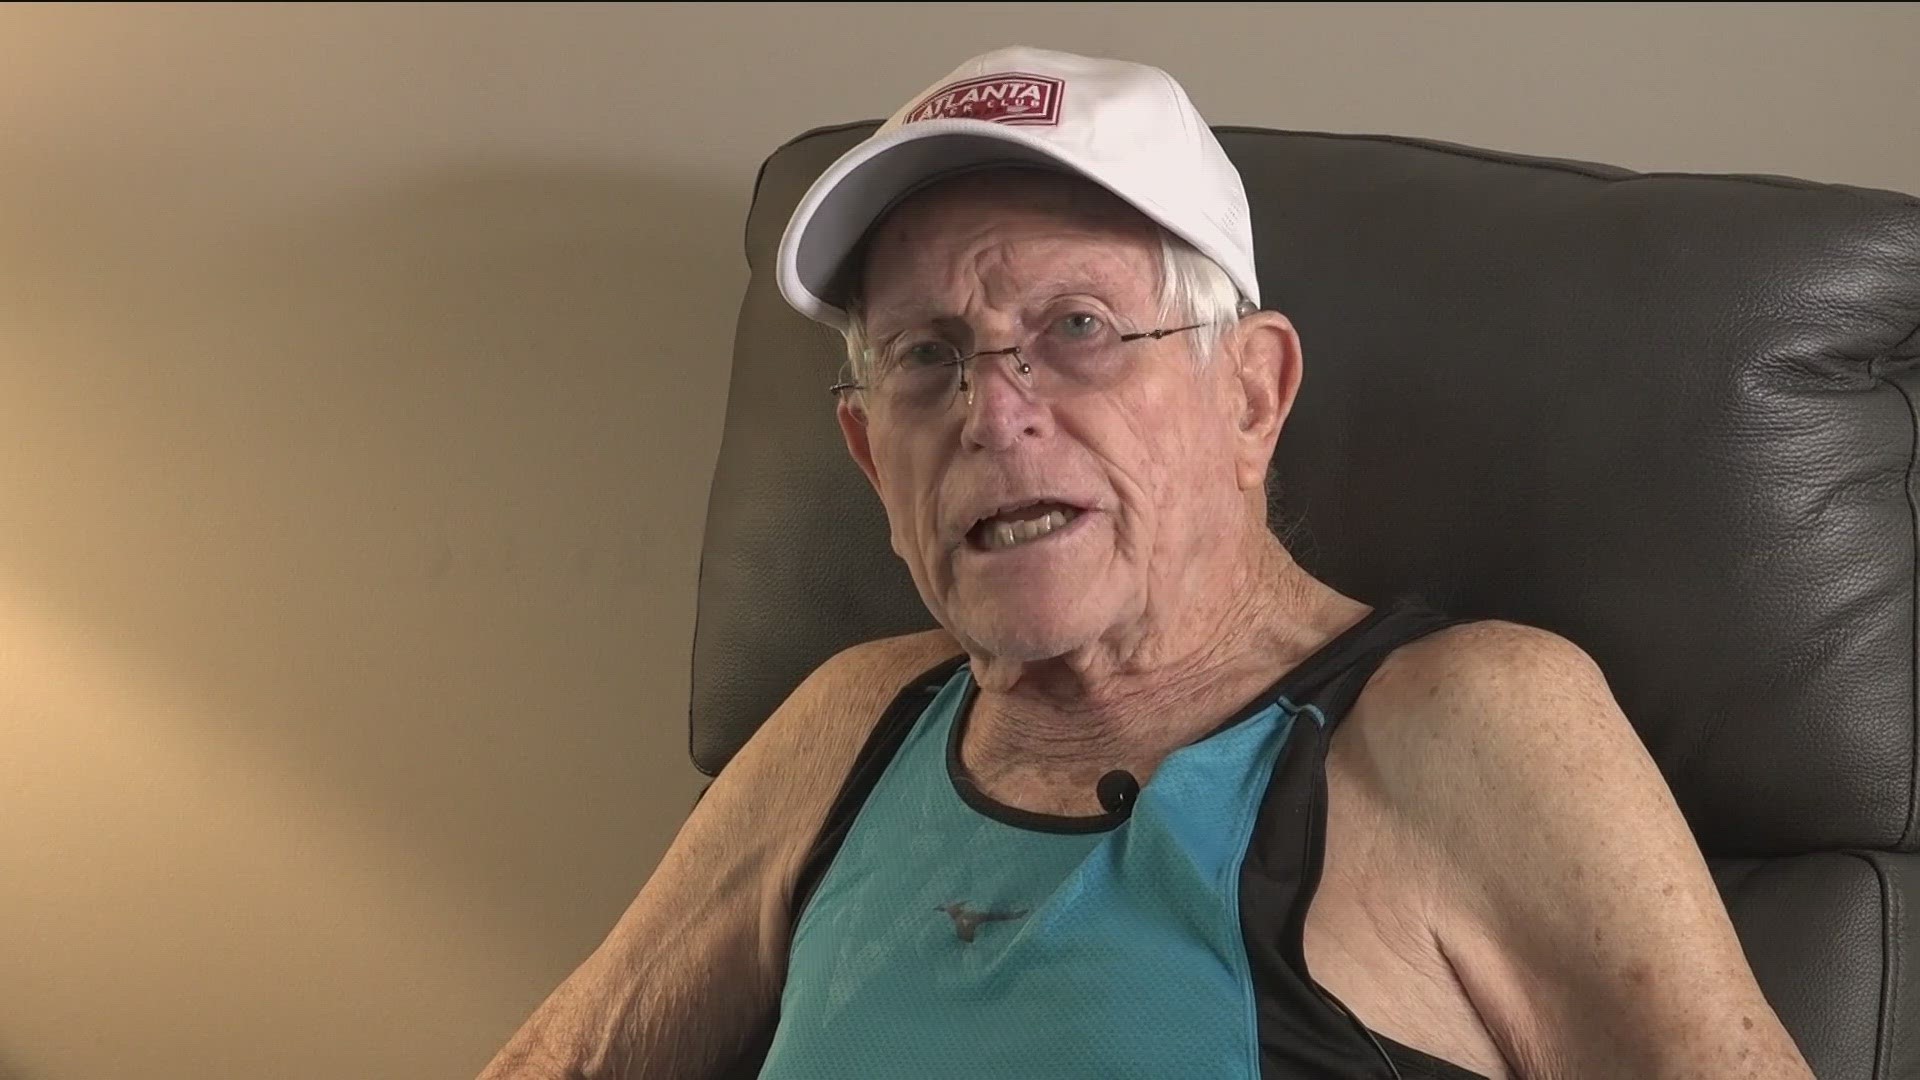 92-year-old Bill Thorn was the only runner to participate in every race since it began in 1970.